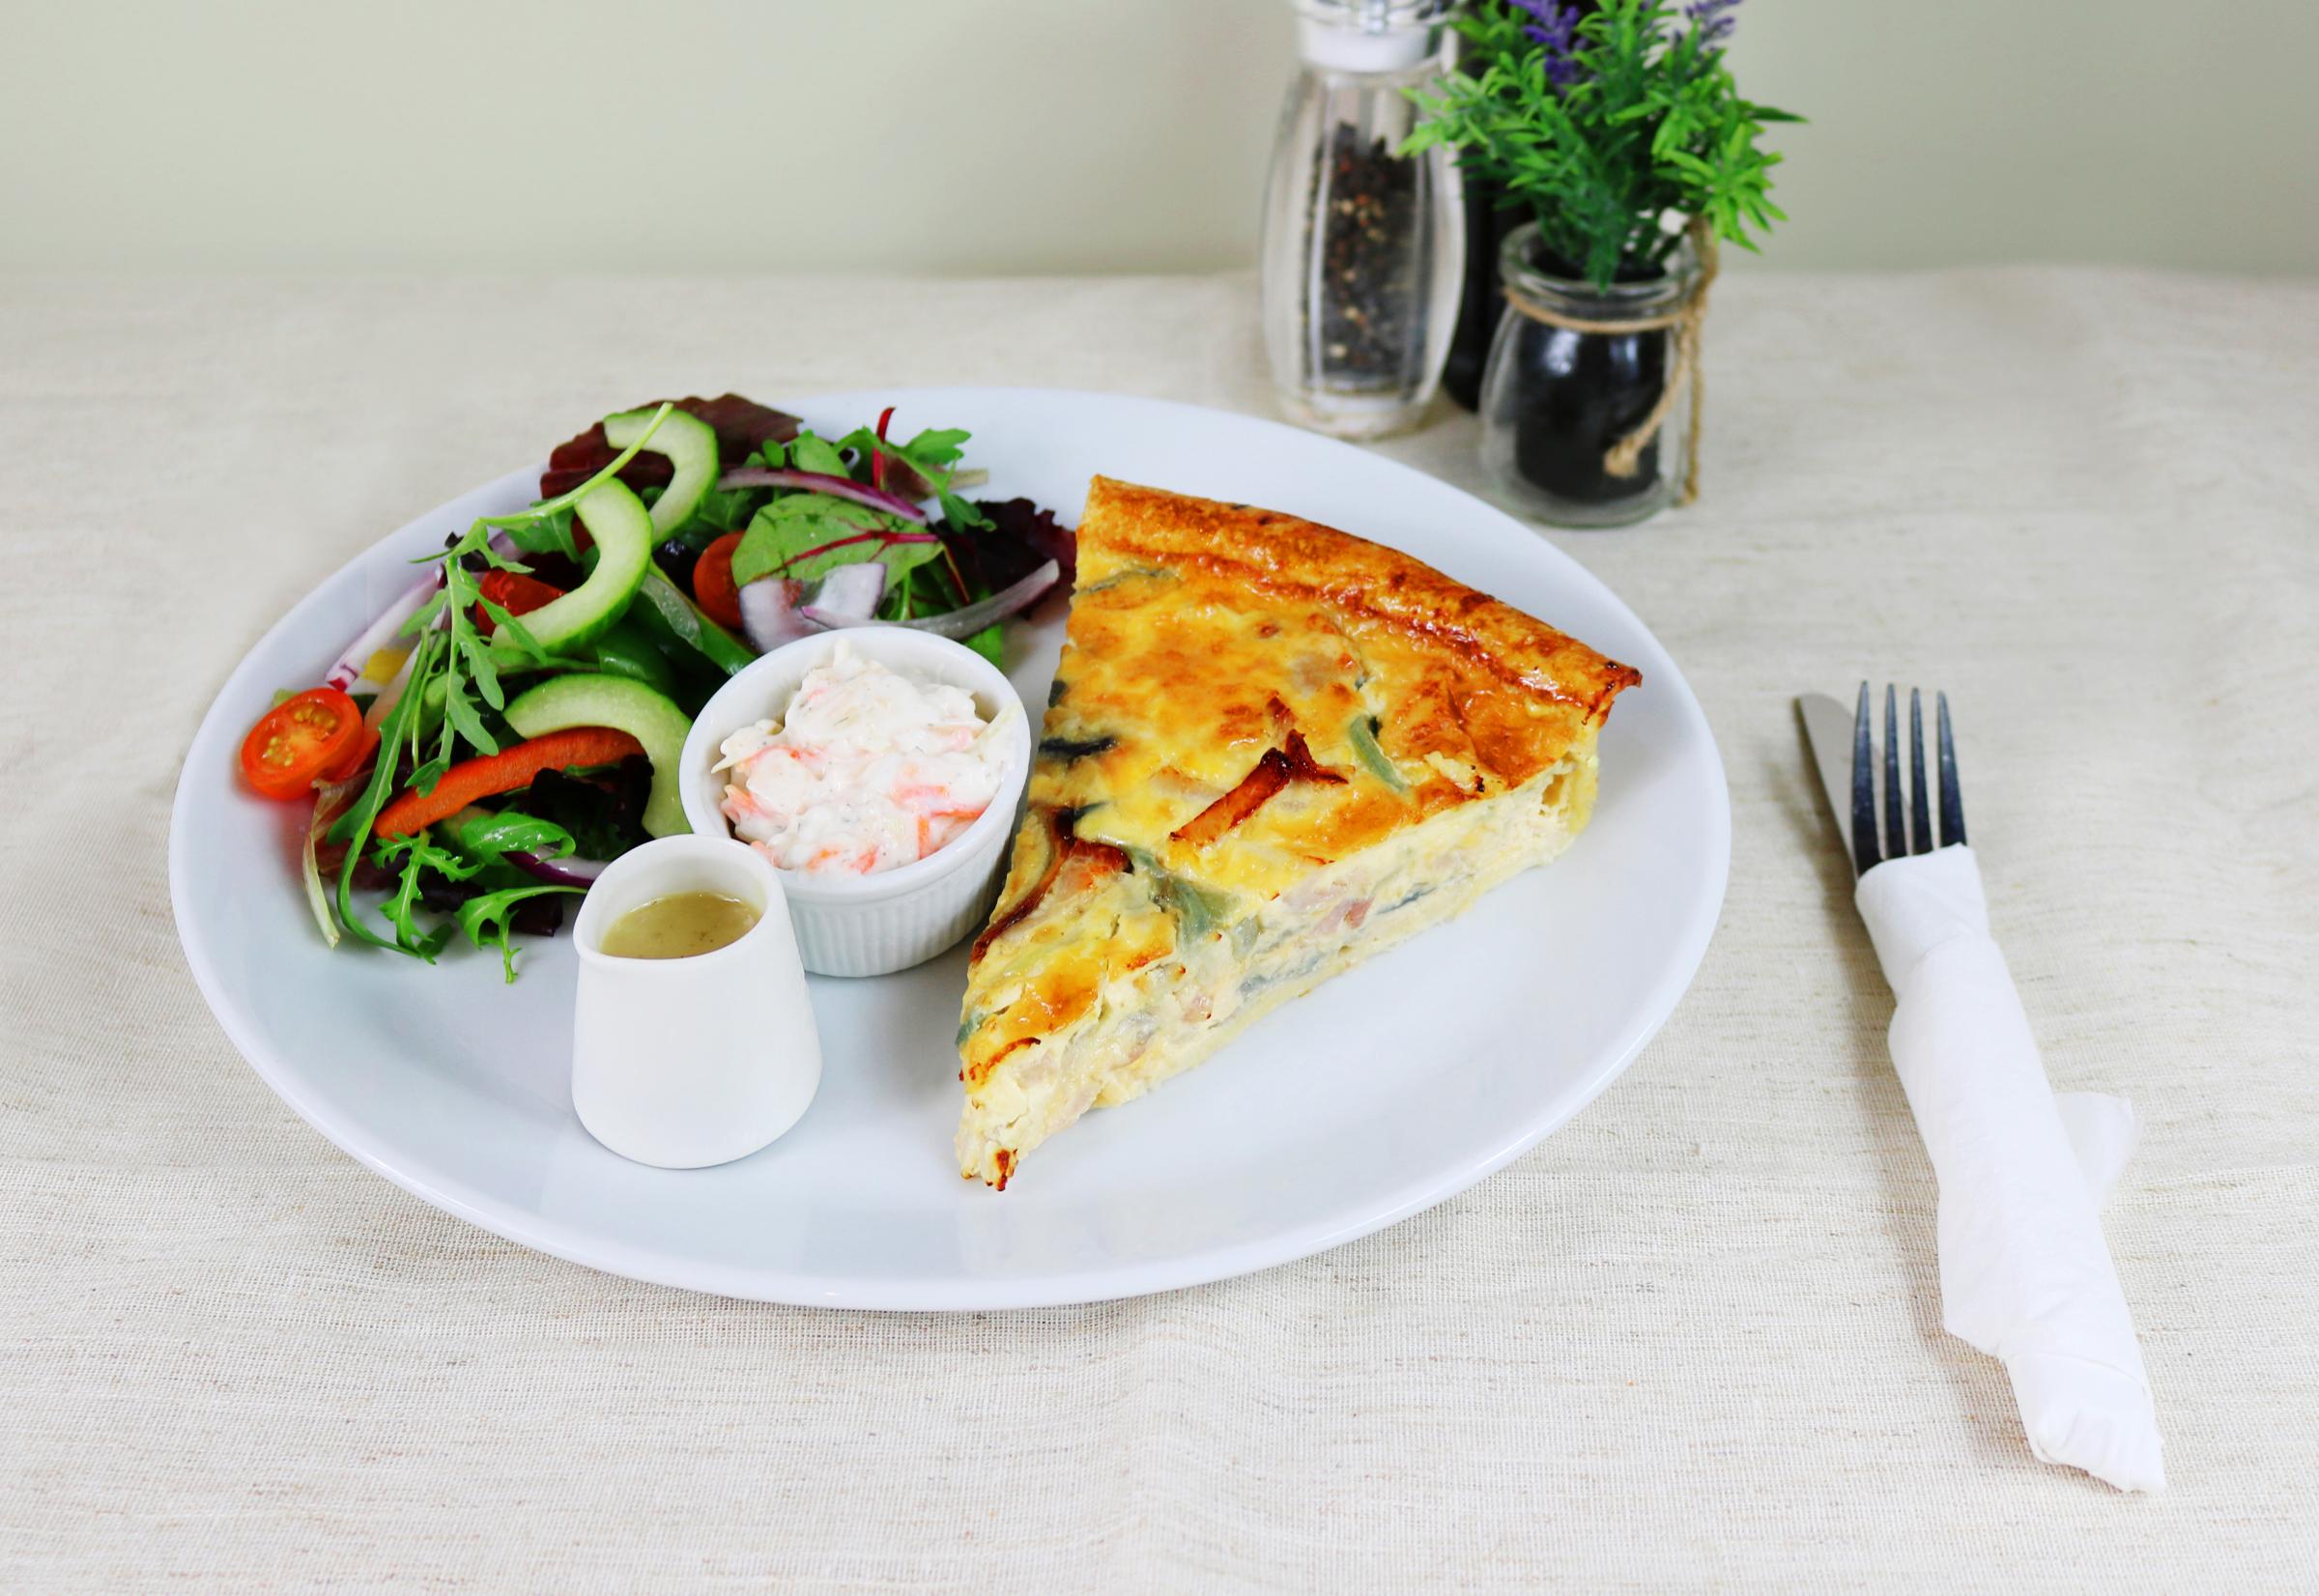 Quiche at the Woodworks Cafe, Mold.